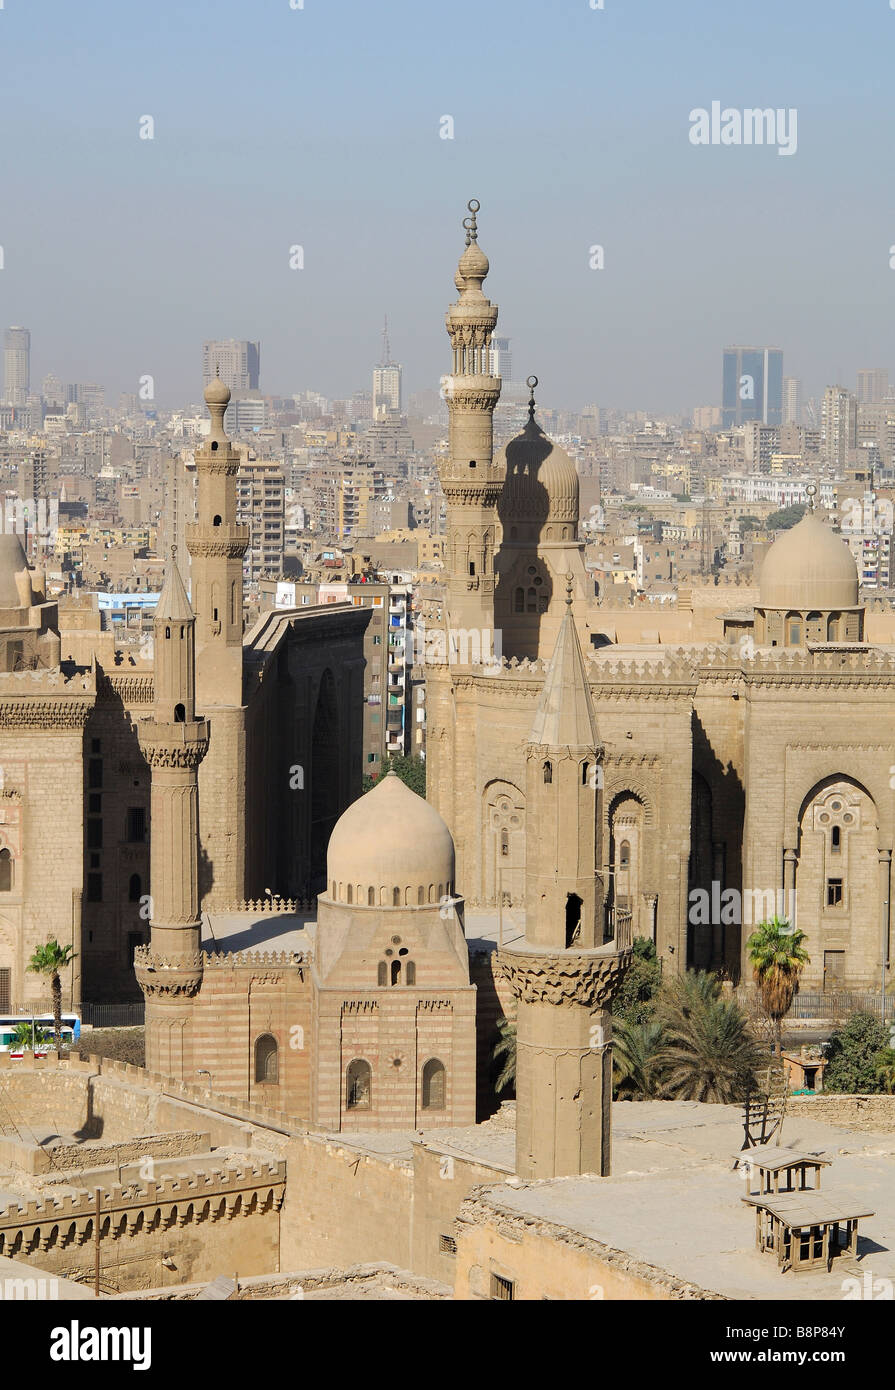 CAIRO, EGYPT. A view of the Mosque of Sultan Hassan and Rifai Mosque as seen from the Citadel. 2009. Stock Photo